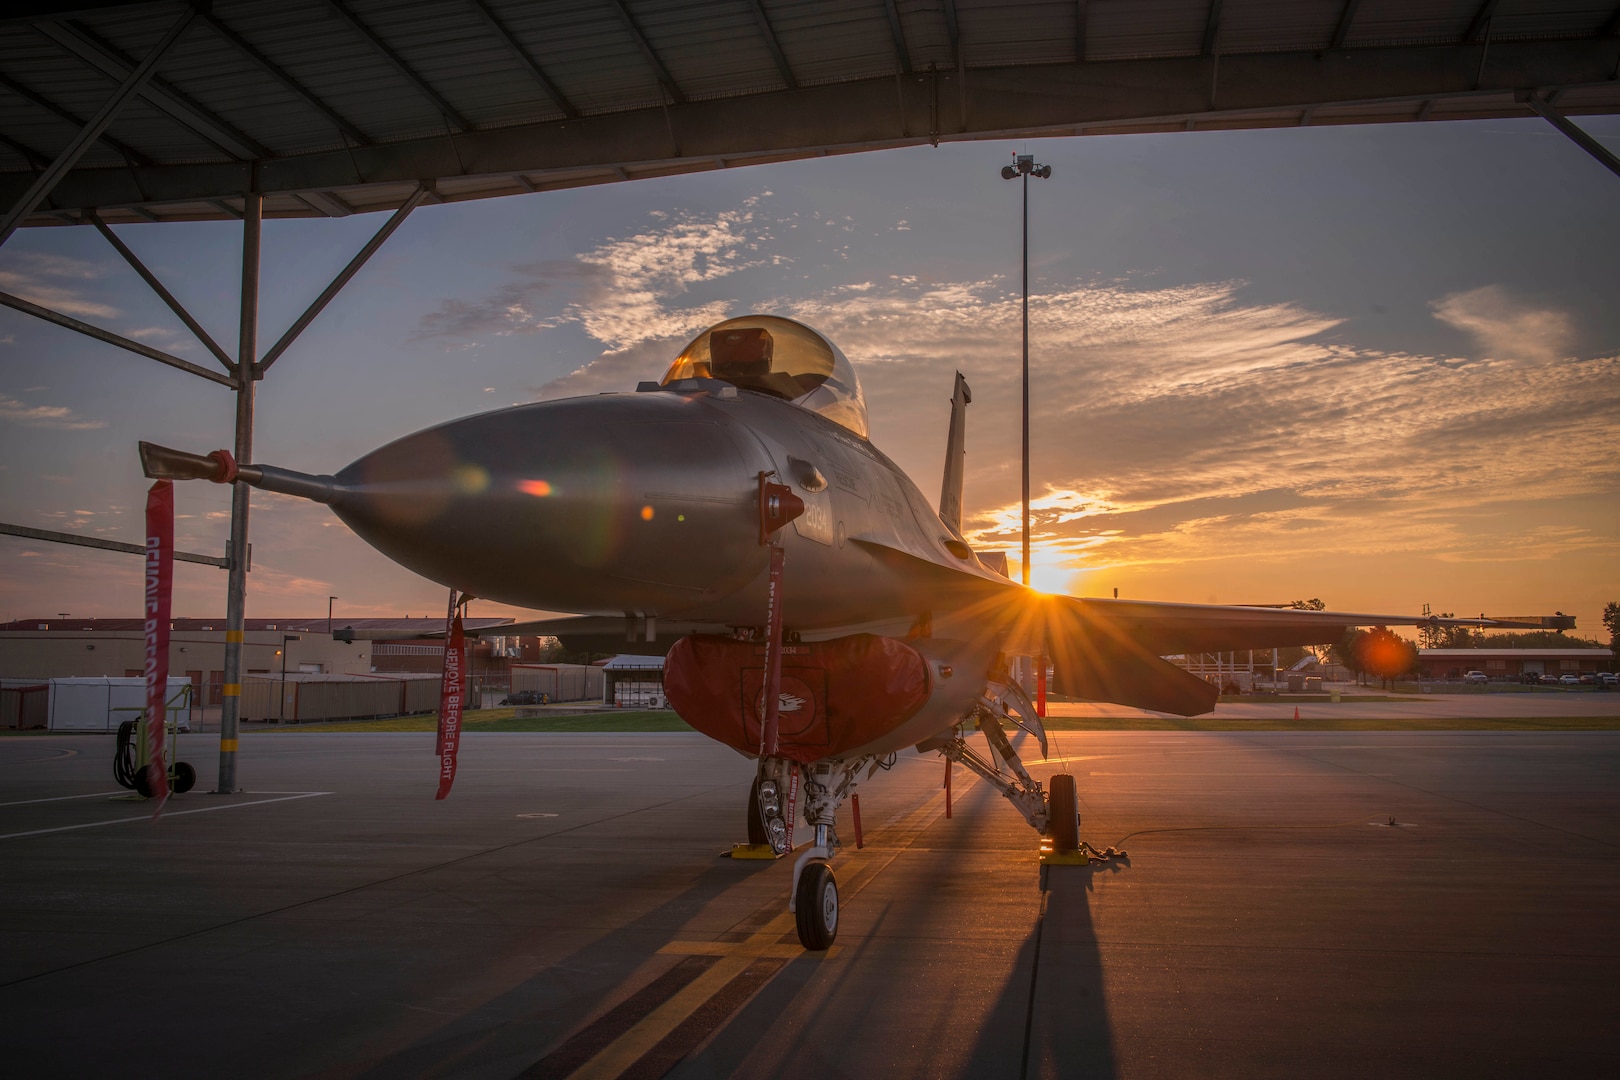 An F-16 sits ready for a new day of activities, Sep. 14, 2016, as an early morning sunrise breaks over the horizon at Tulsa Air National Guard base, Tulsa, OK.



(U.S. Air National Guard photo by Tech. Sgt. Drew A. Egnoske)